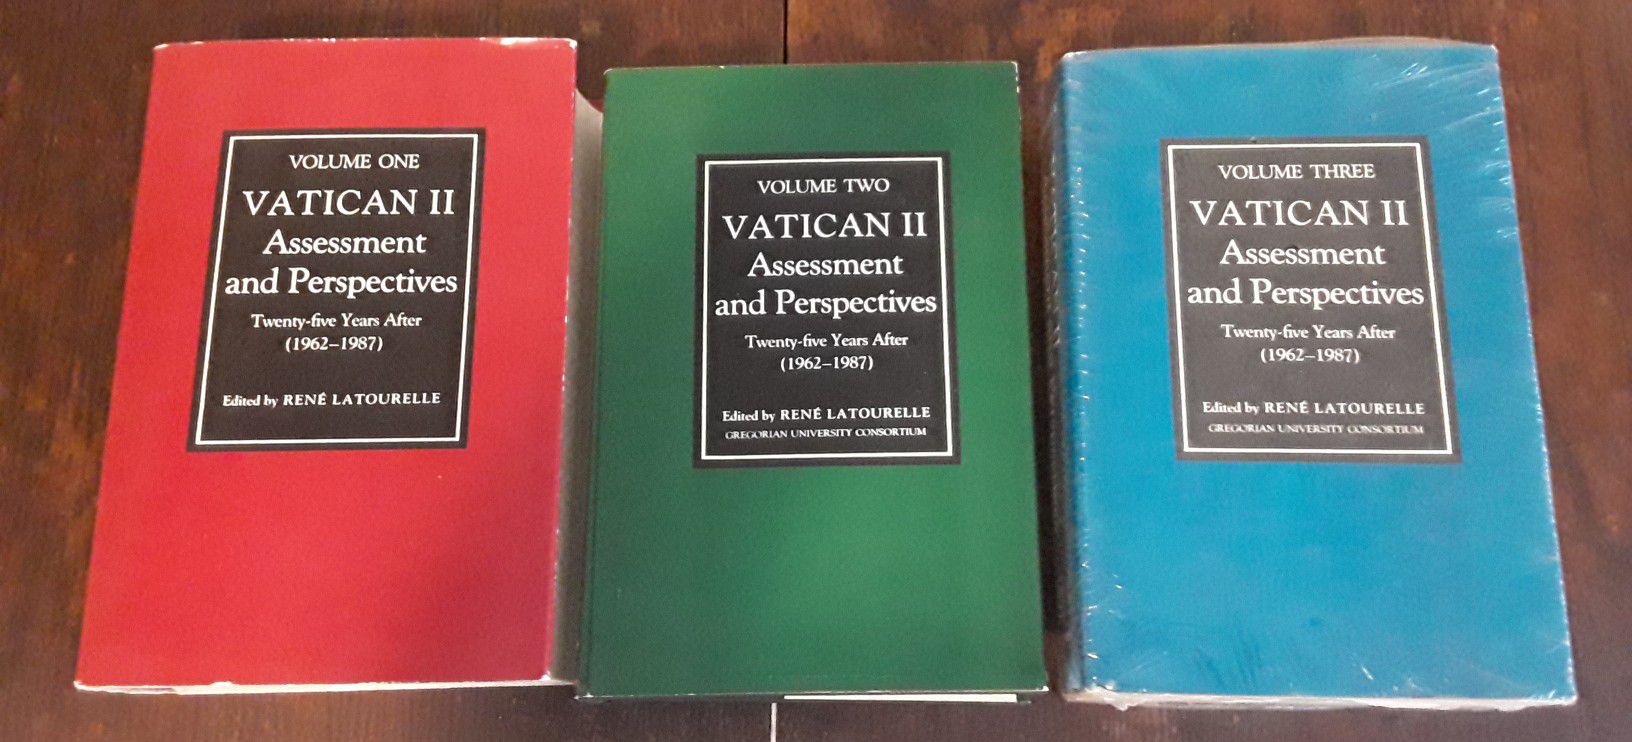 Vatican II assessment and perspective 25 years after, volumes 1, 2 and 3 books, all three for $25